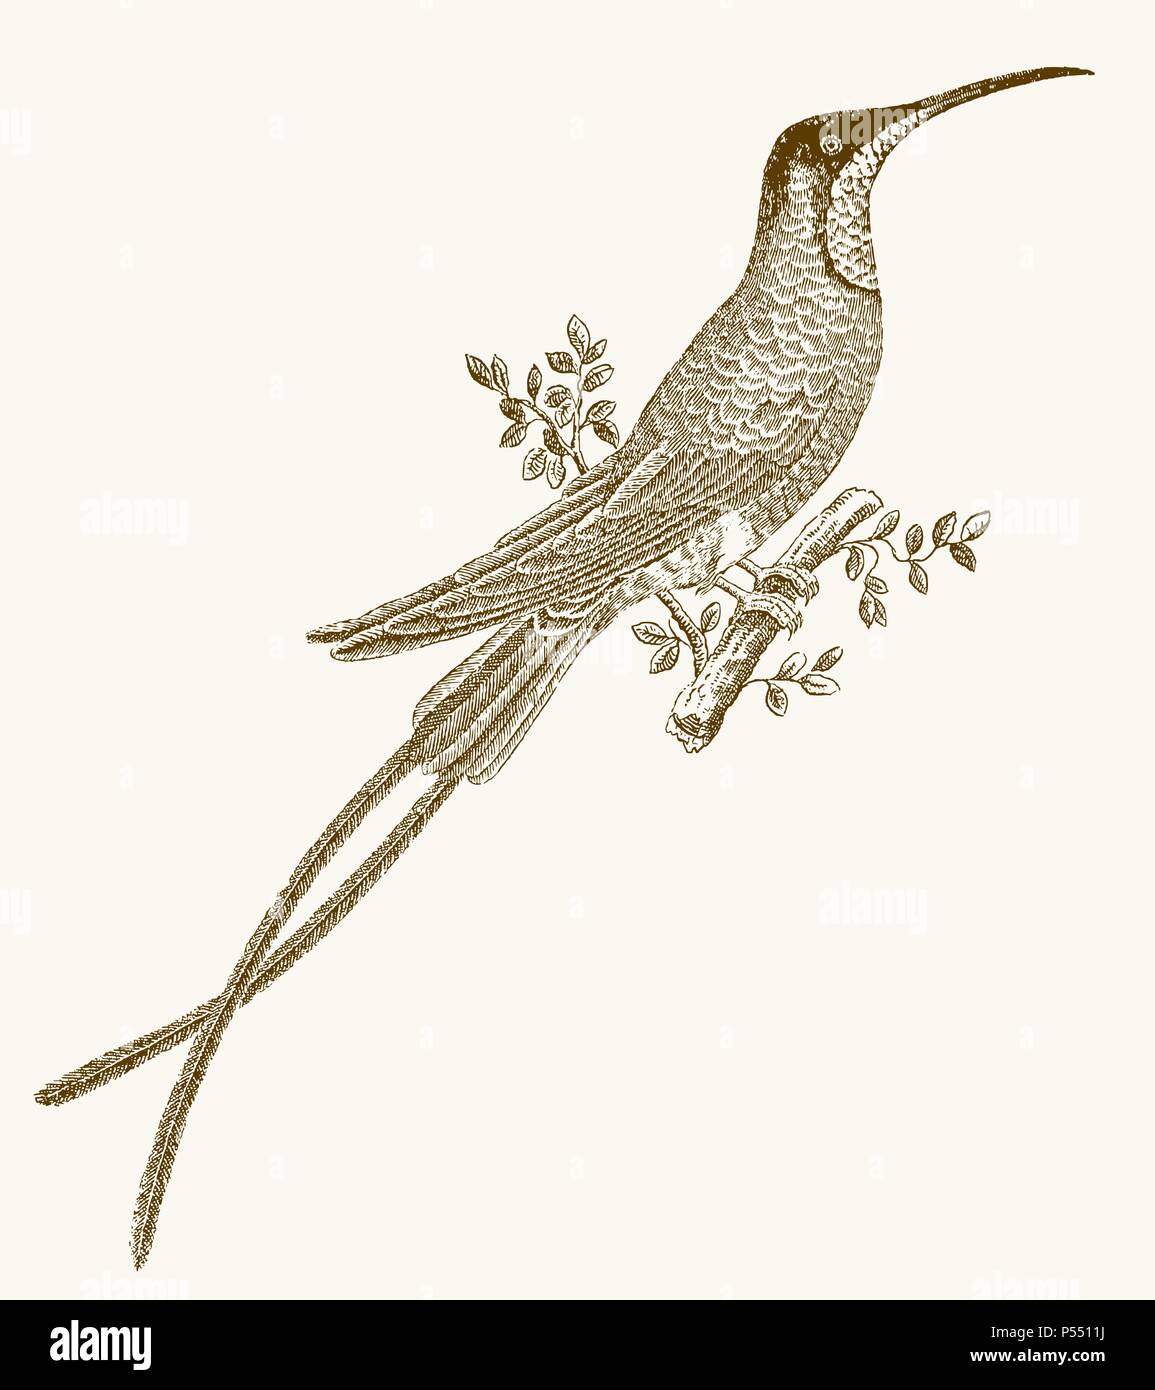 Crimson topaz (topaza pella) hummingbird with long tail feathers sitting on a branch. Illustration after a vintage engraving from the 19th century Stock Vector